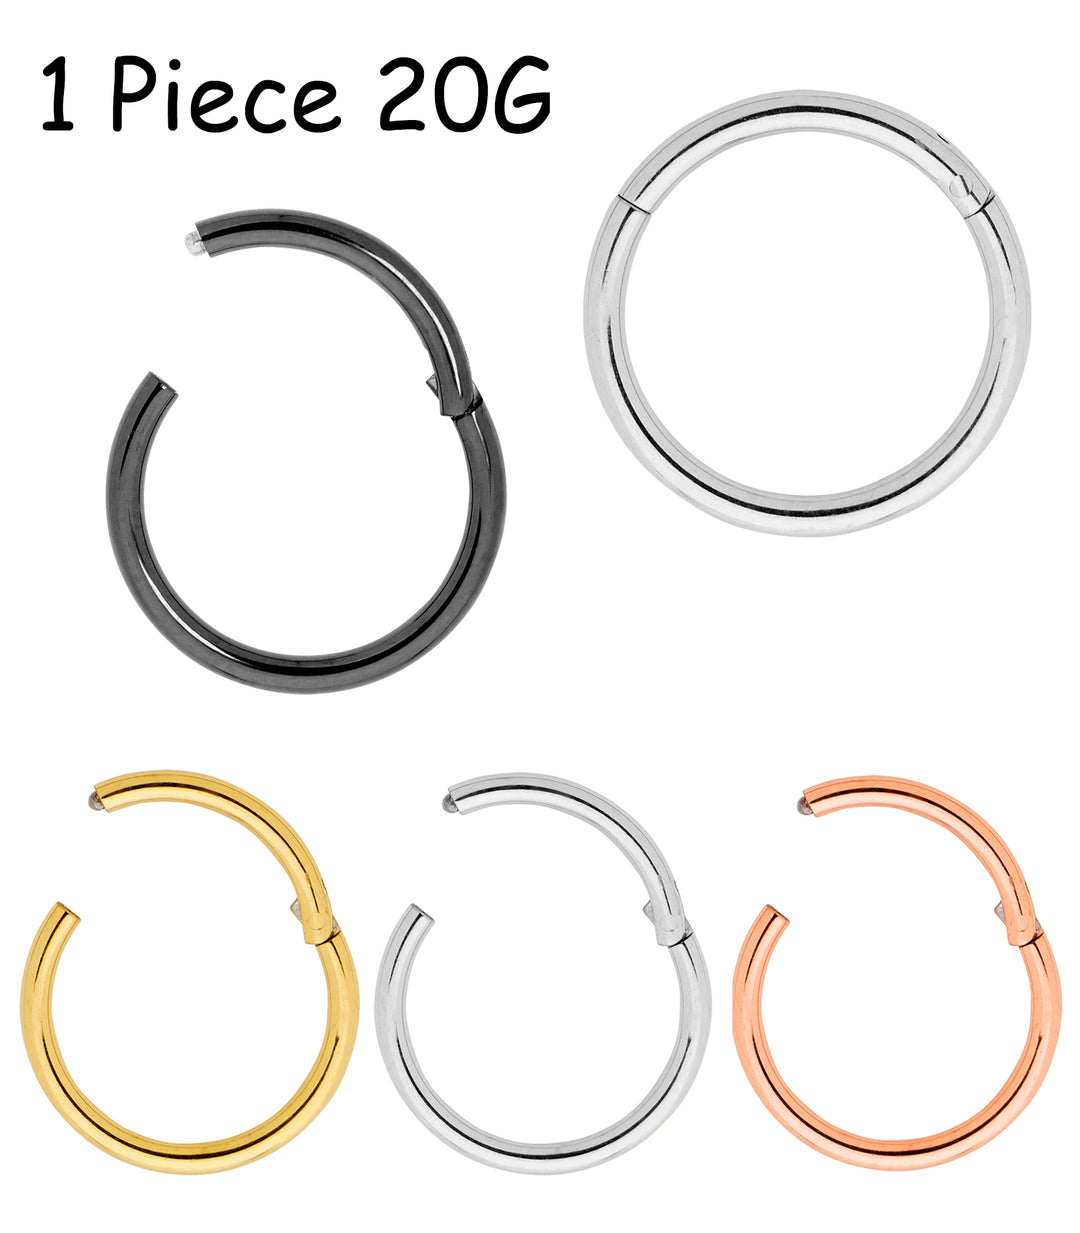 1 Piece 20G (thinnest) Stainless Steel Polished Hinged Hoop Segment Nose Ring Earring 6mm – 10mm